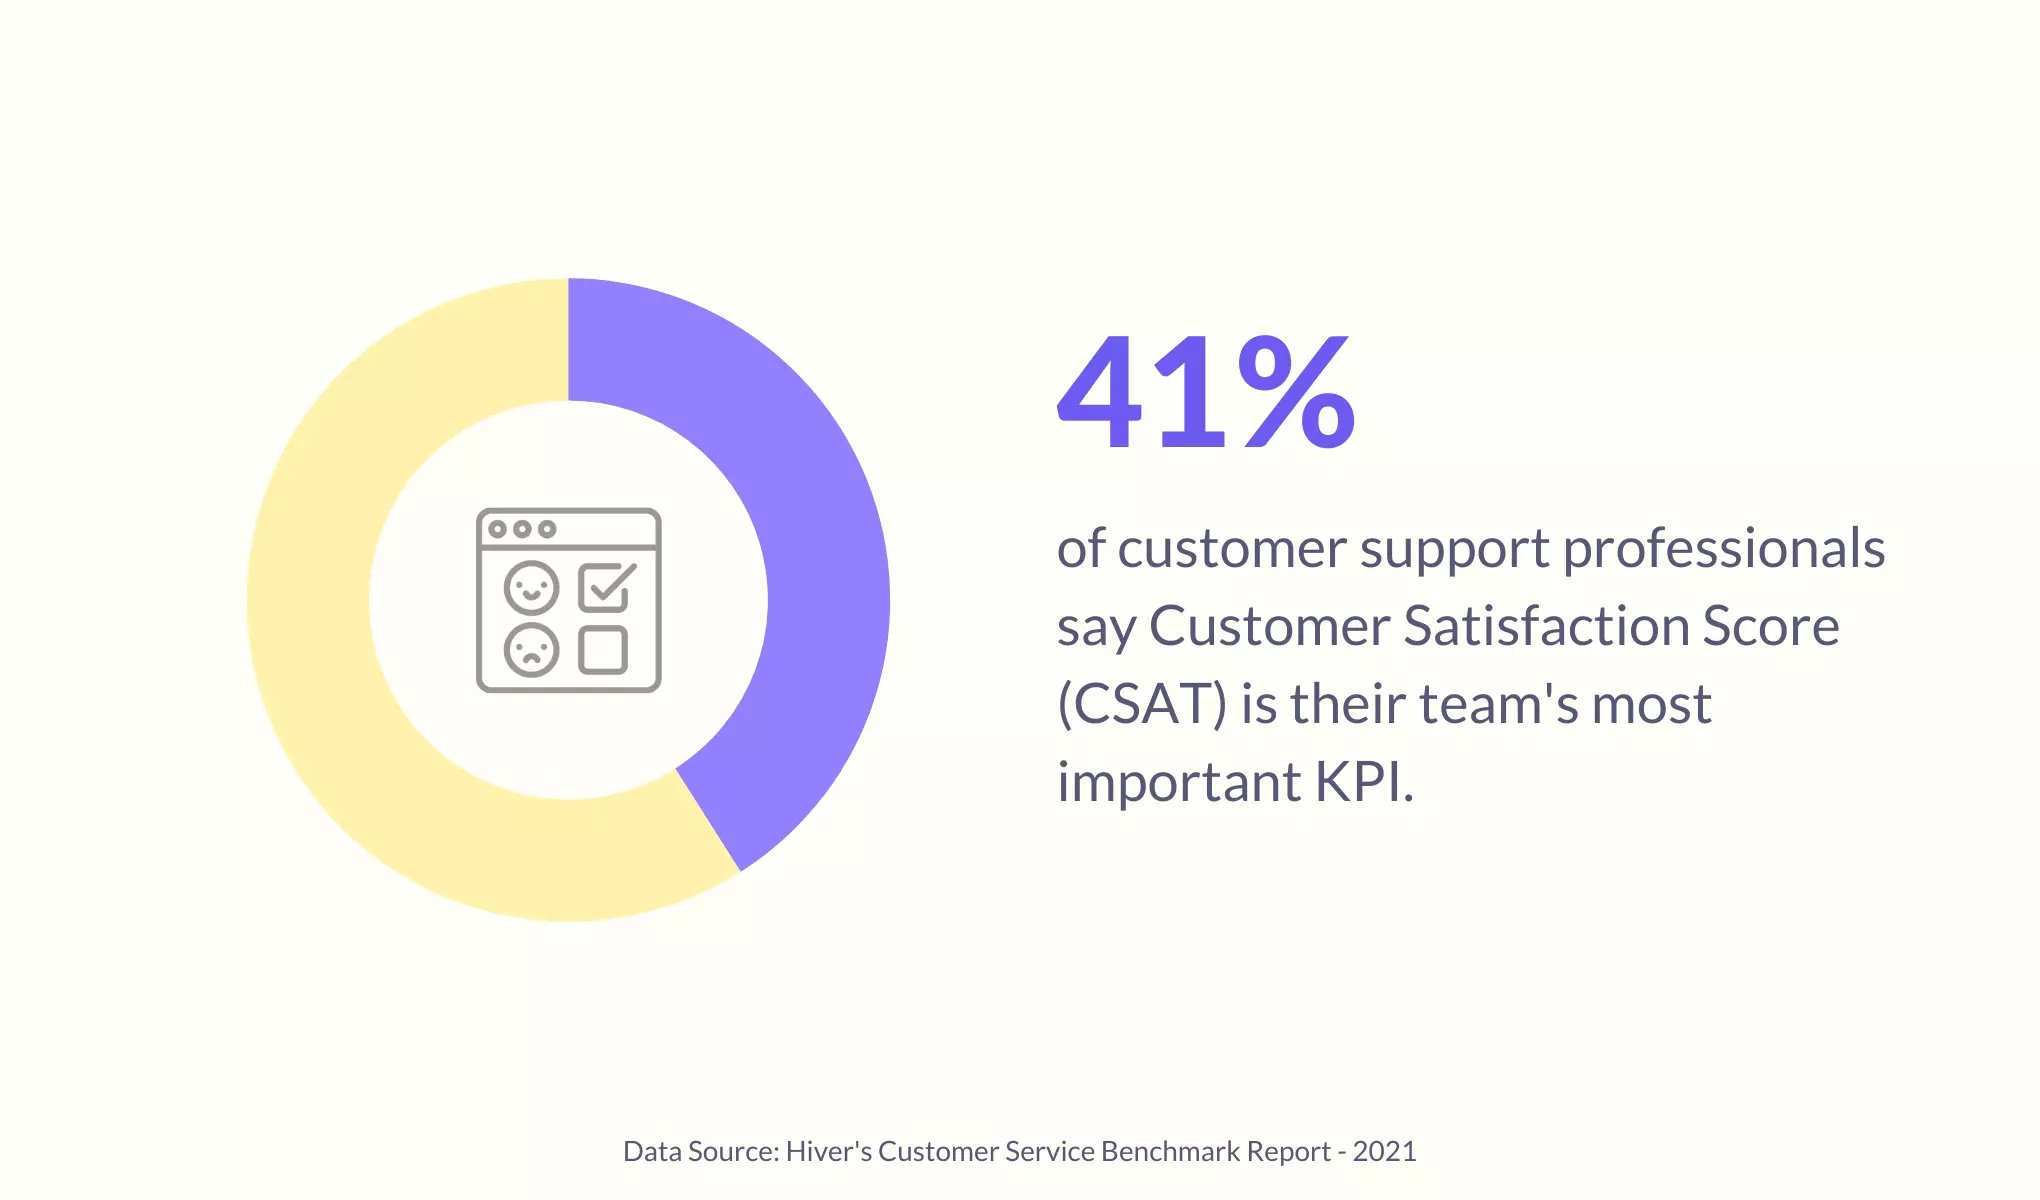 CSAT is the most important KPI